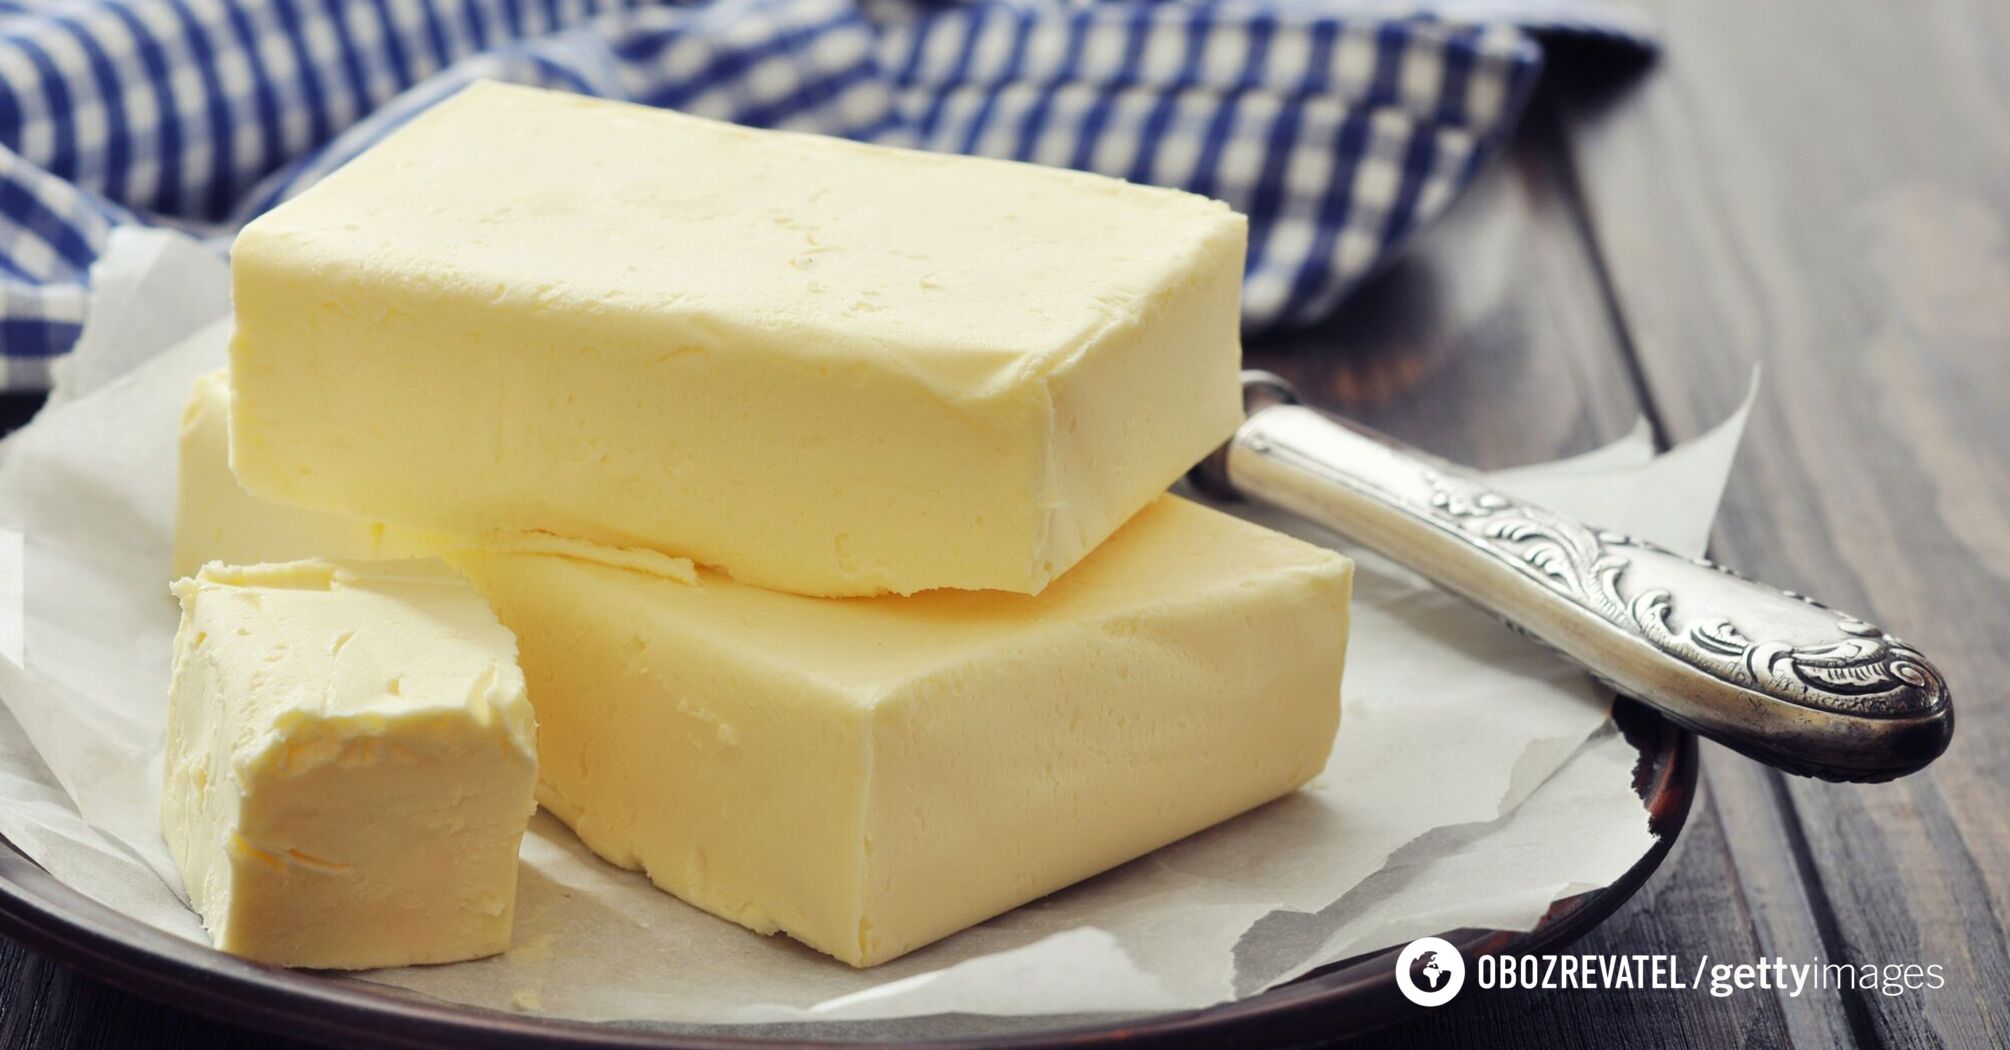 Butter helps reduce the total amount of fat in the body